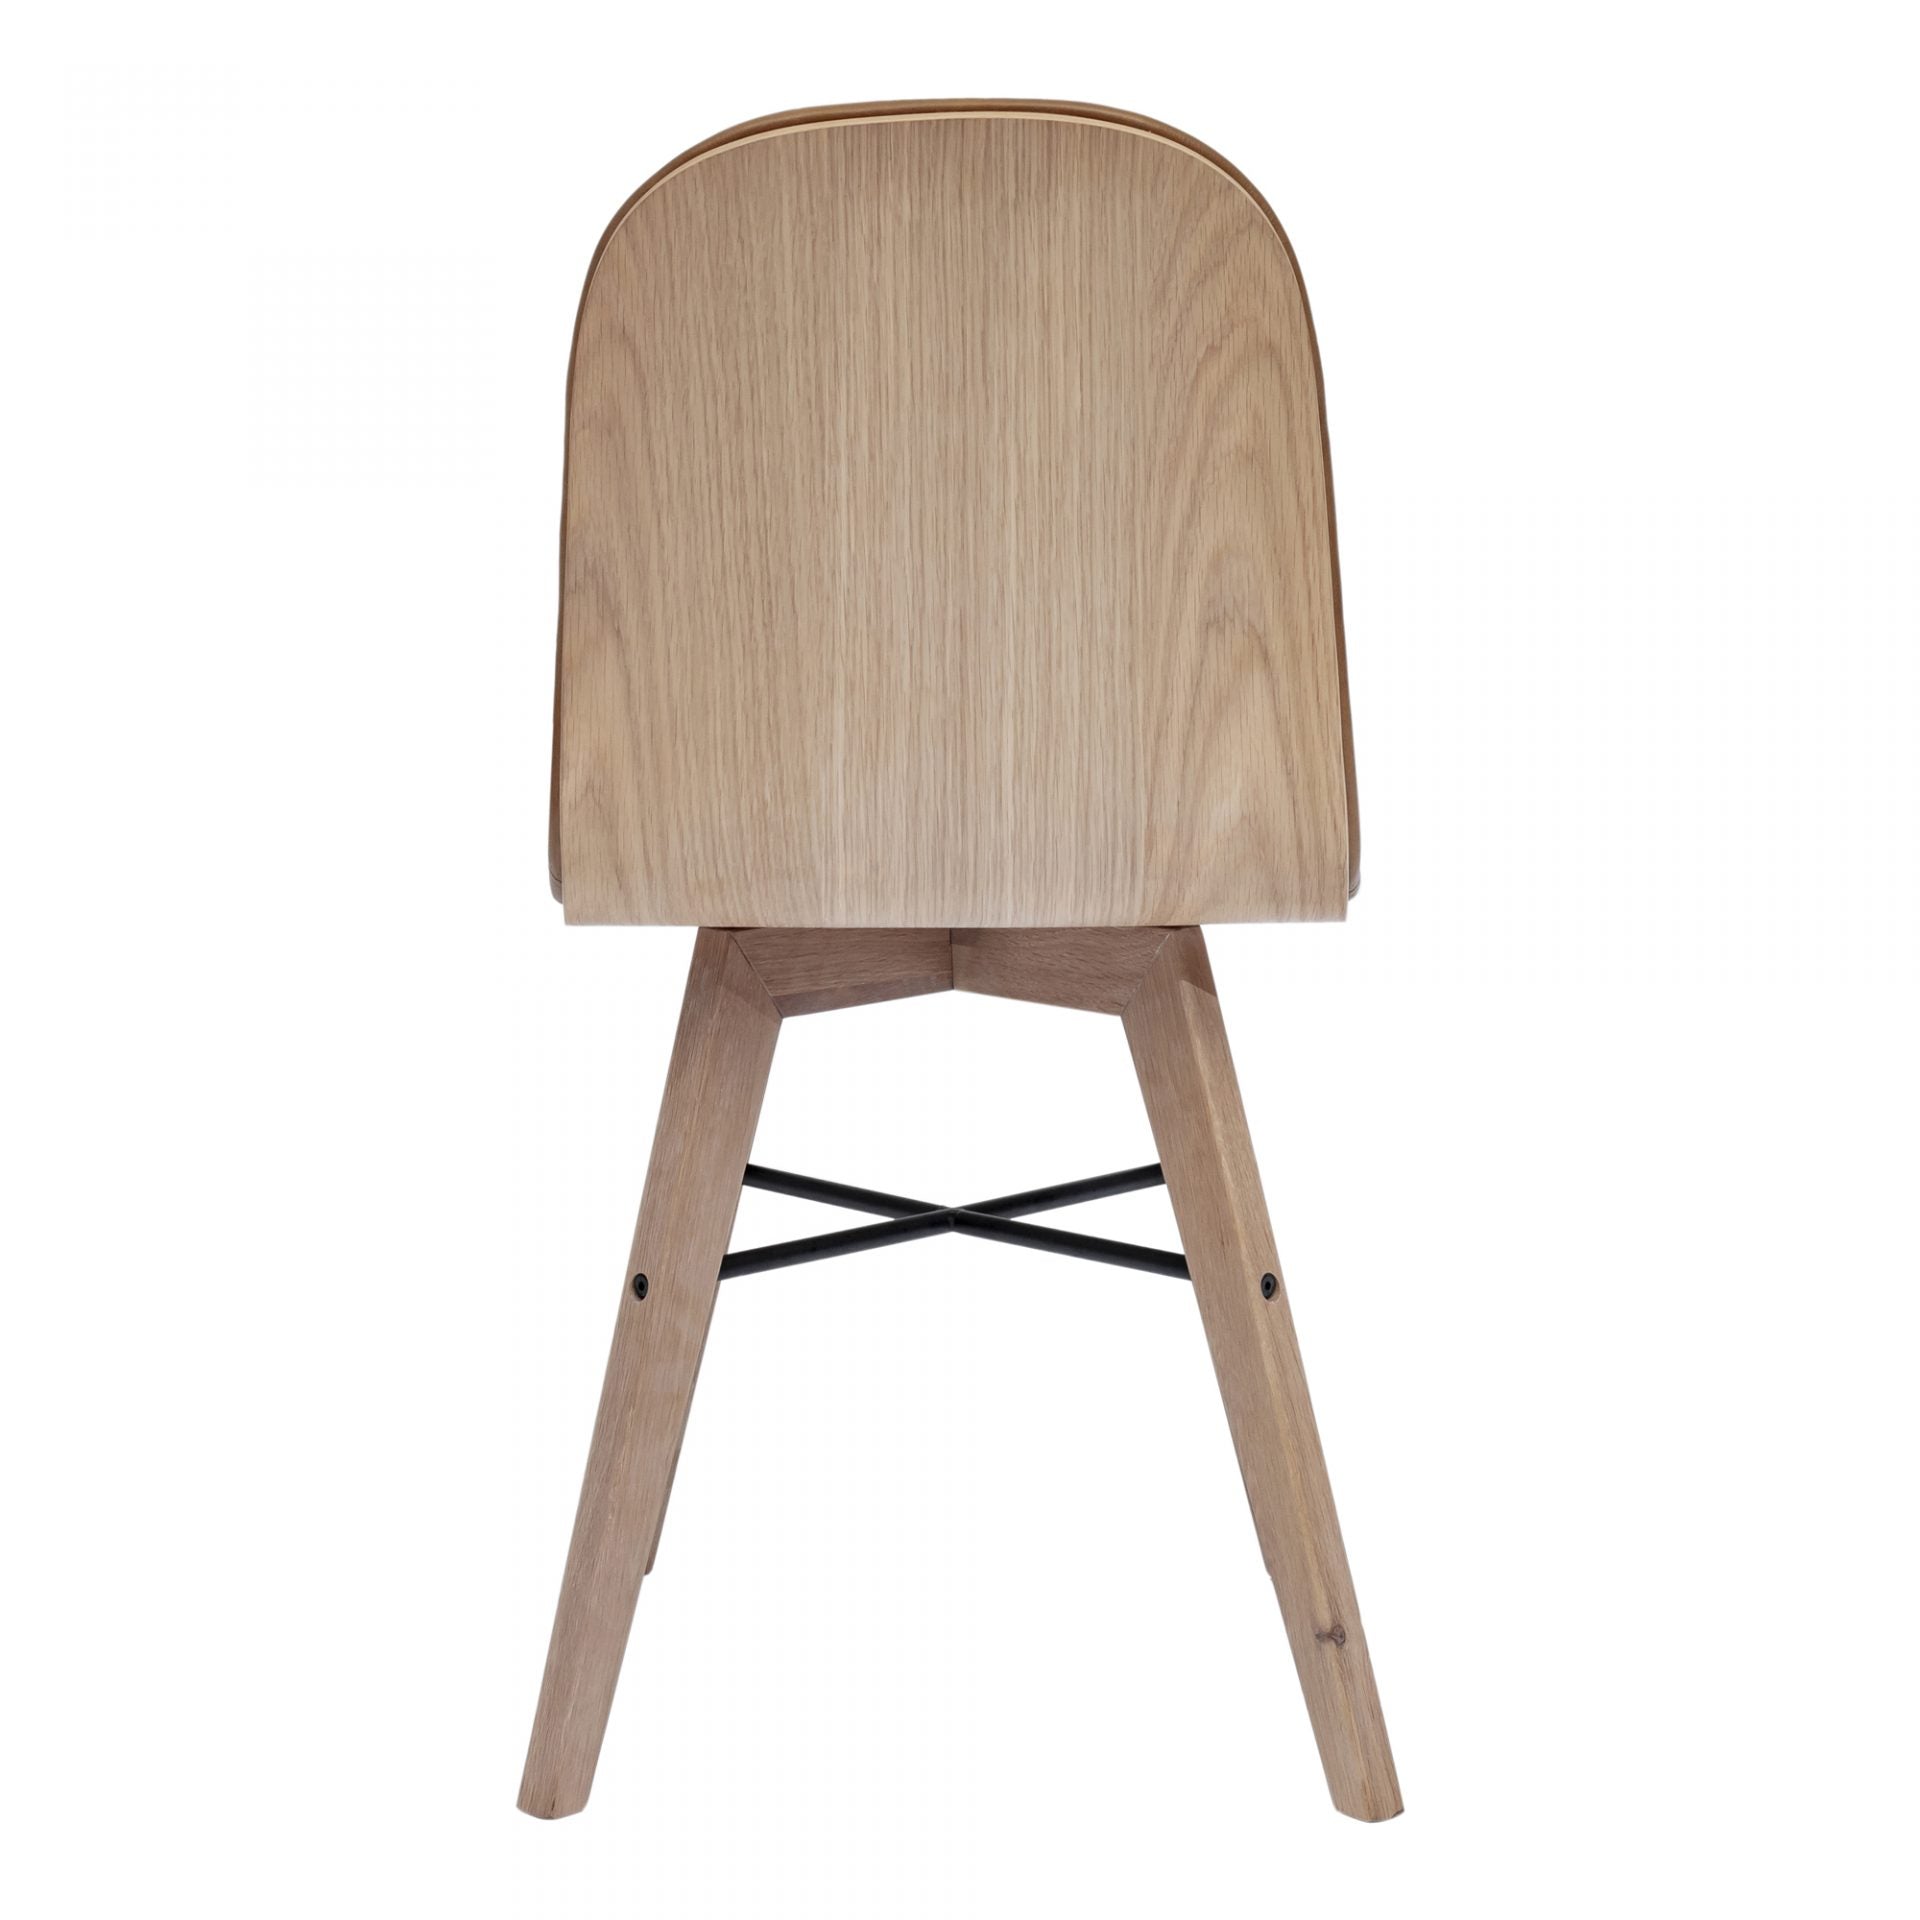 Napoli Dining Chair